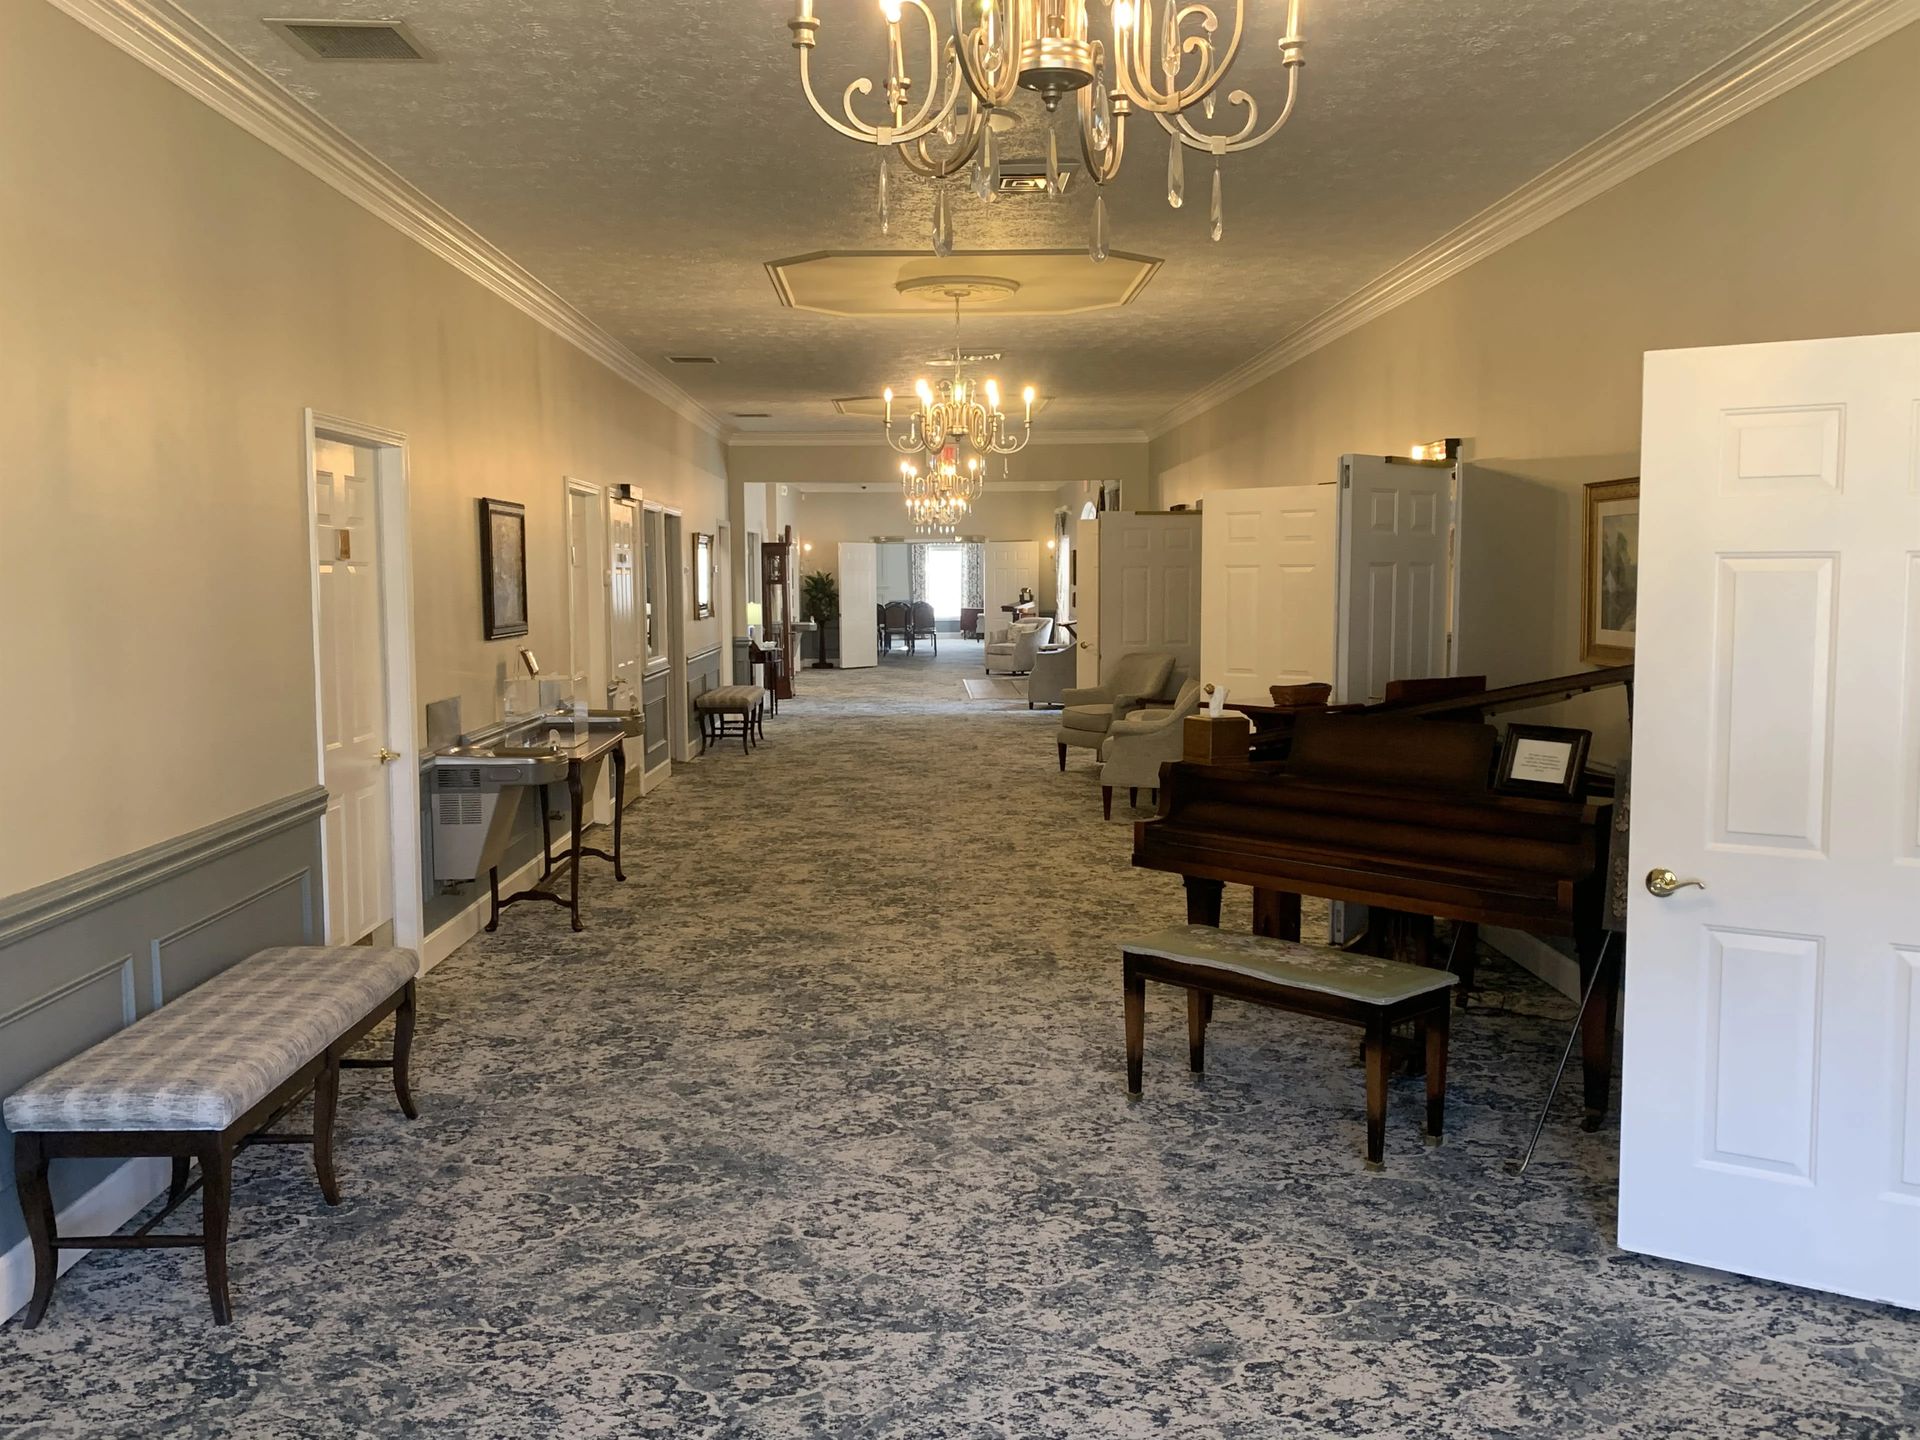 there is a piano in the middle of the hallway .